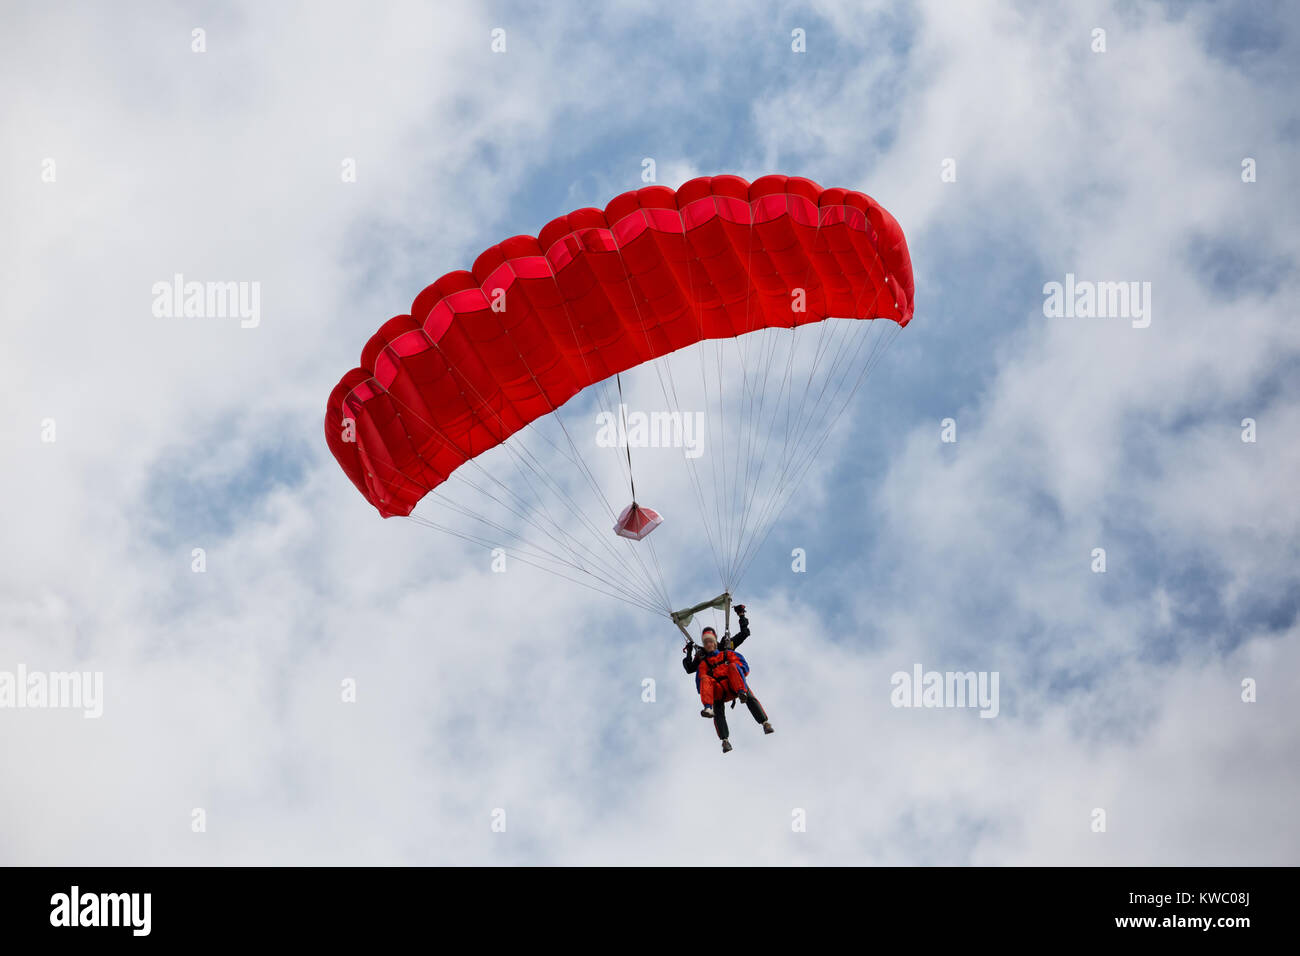 Parachuter Descending With A Red Parachute Stock Photo Alamy